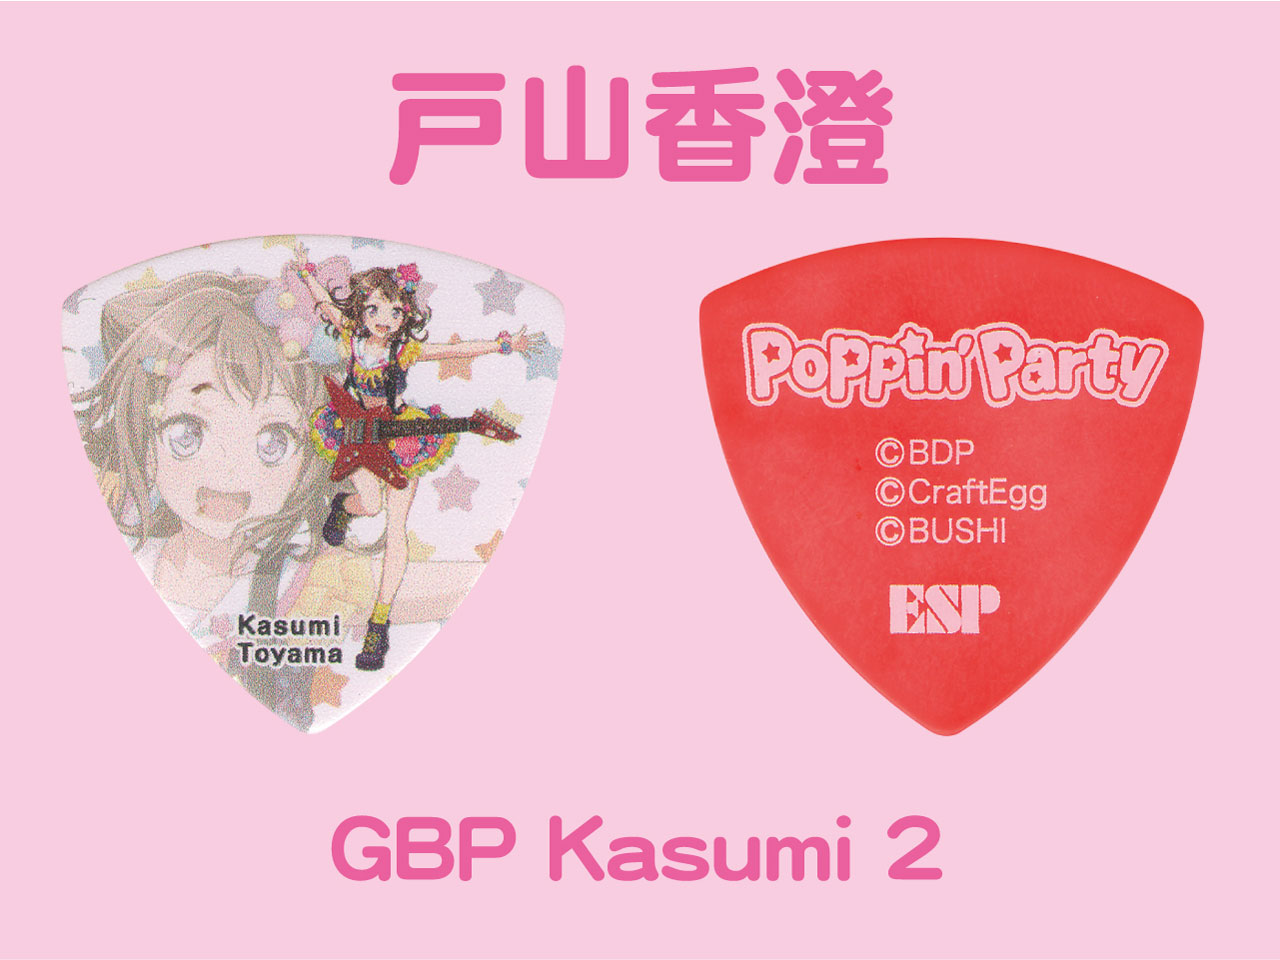 【ESP×BanG Dream!コラボピック】Poppin' Party Character Pick "戸山香澄"（GBP Kasumi 2）& "ハメパチ" セット